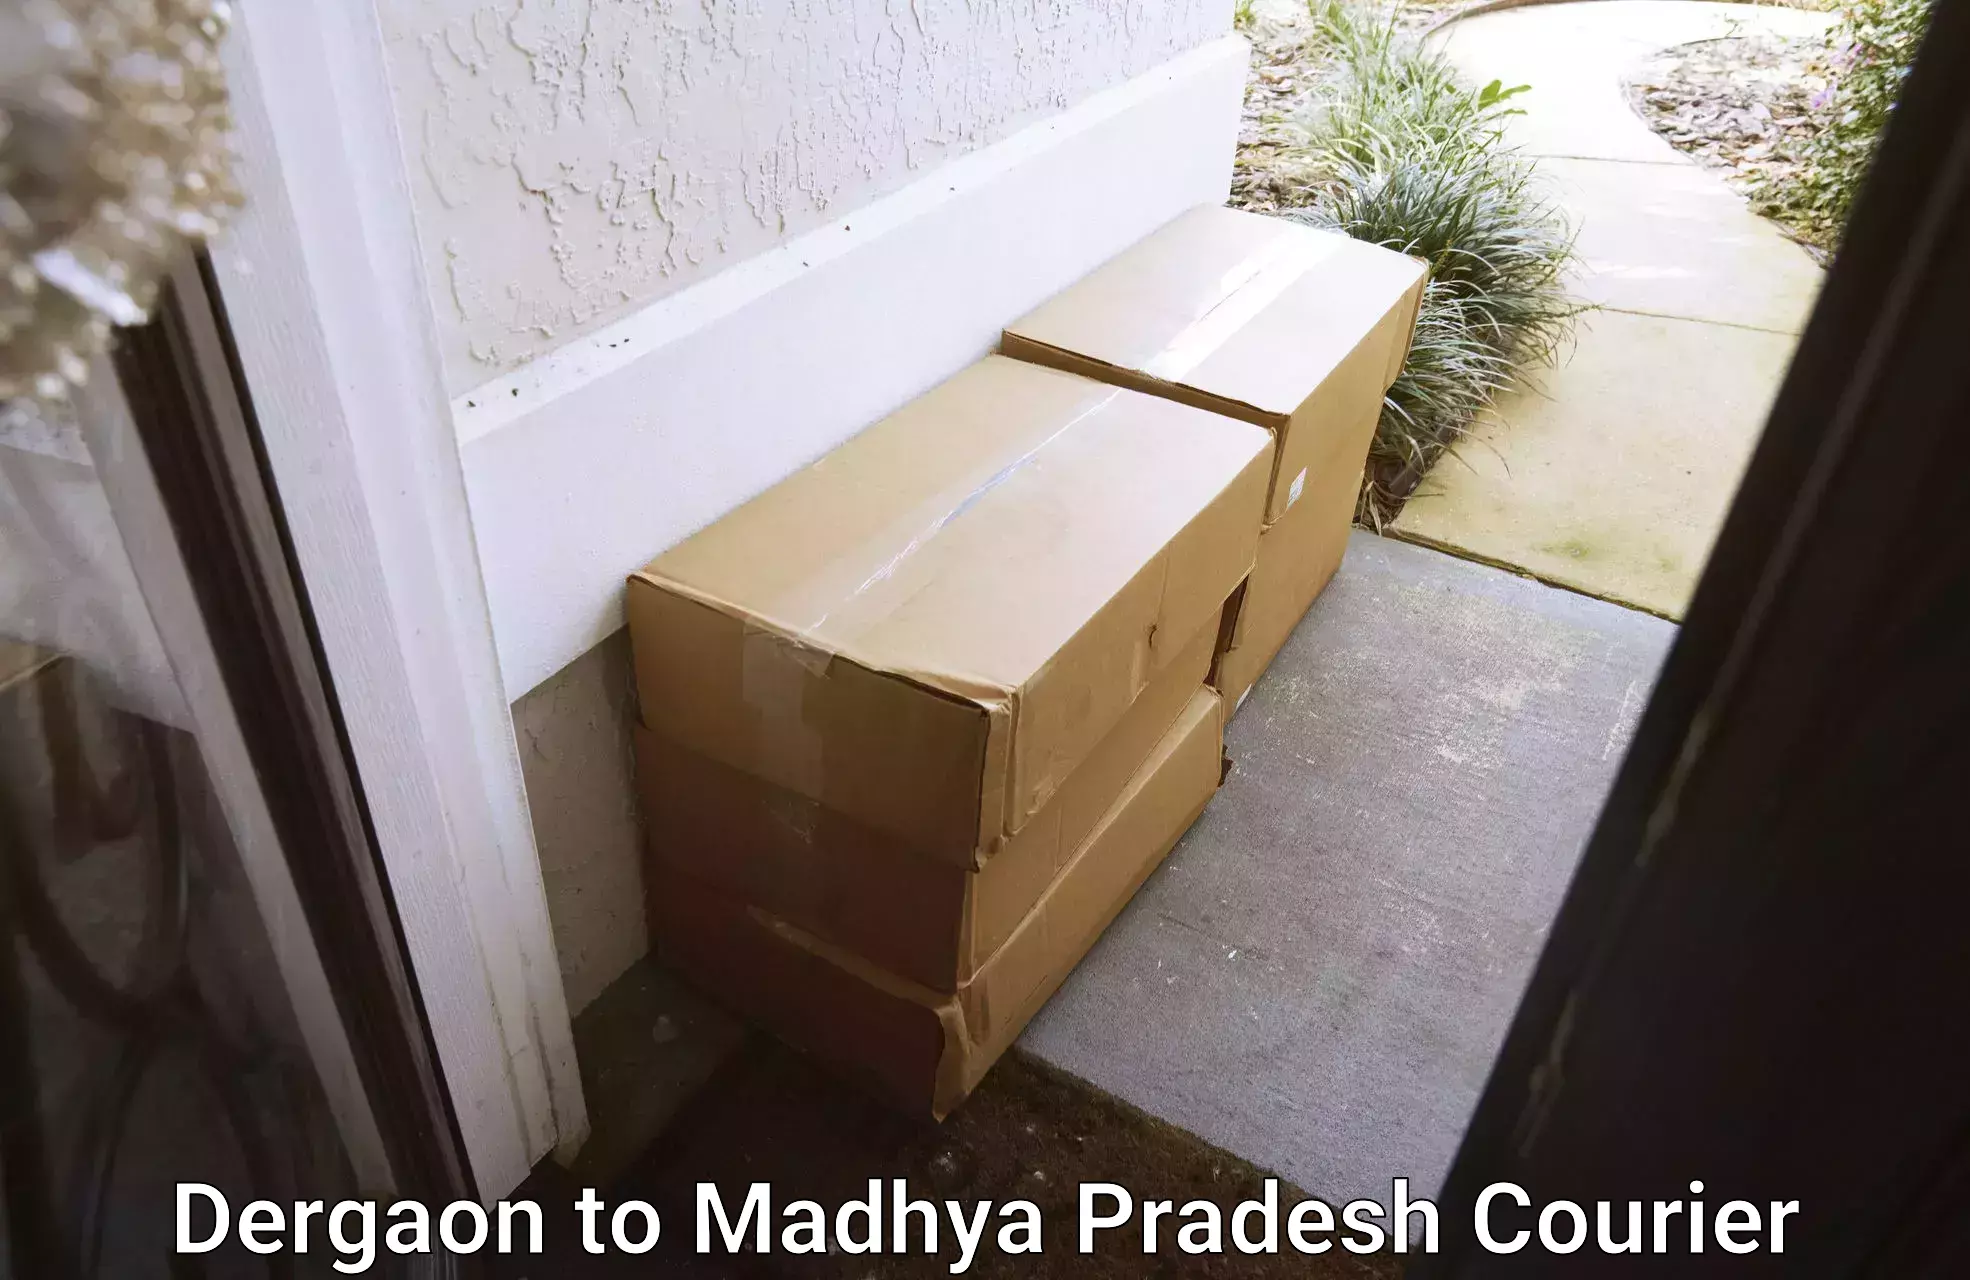 High-priority parcel service Dergaon to Indore